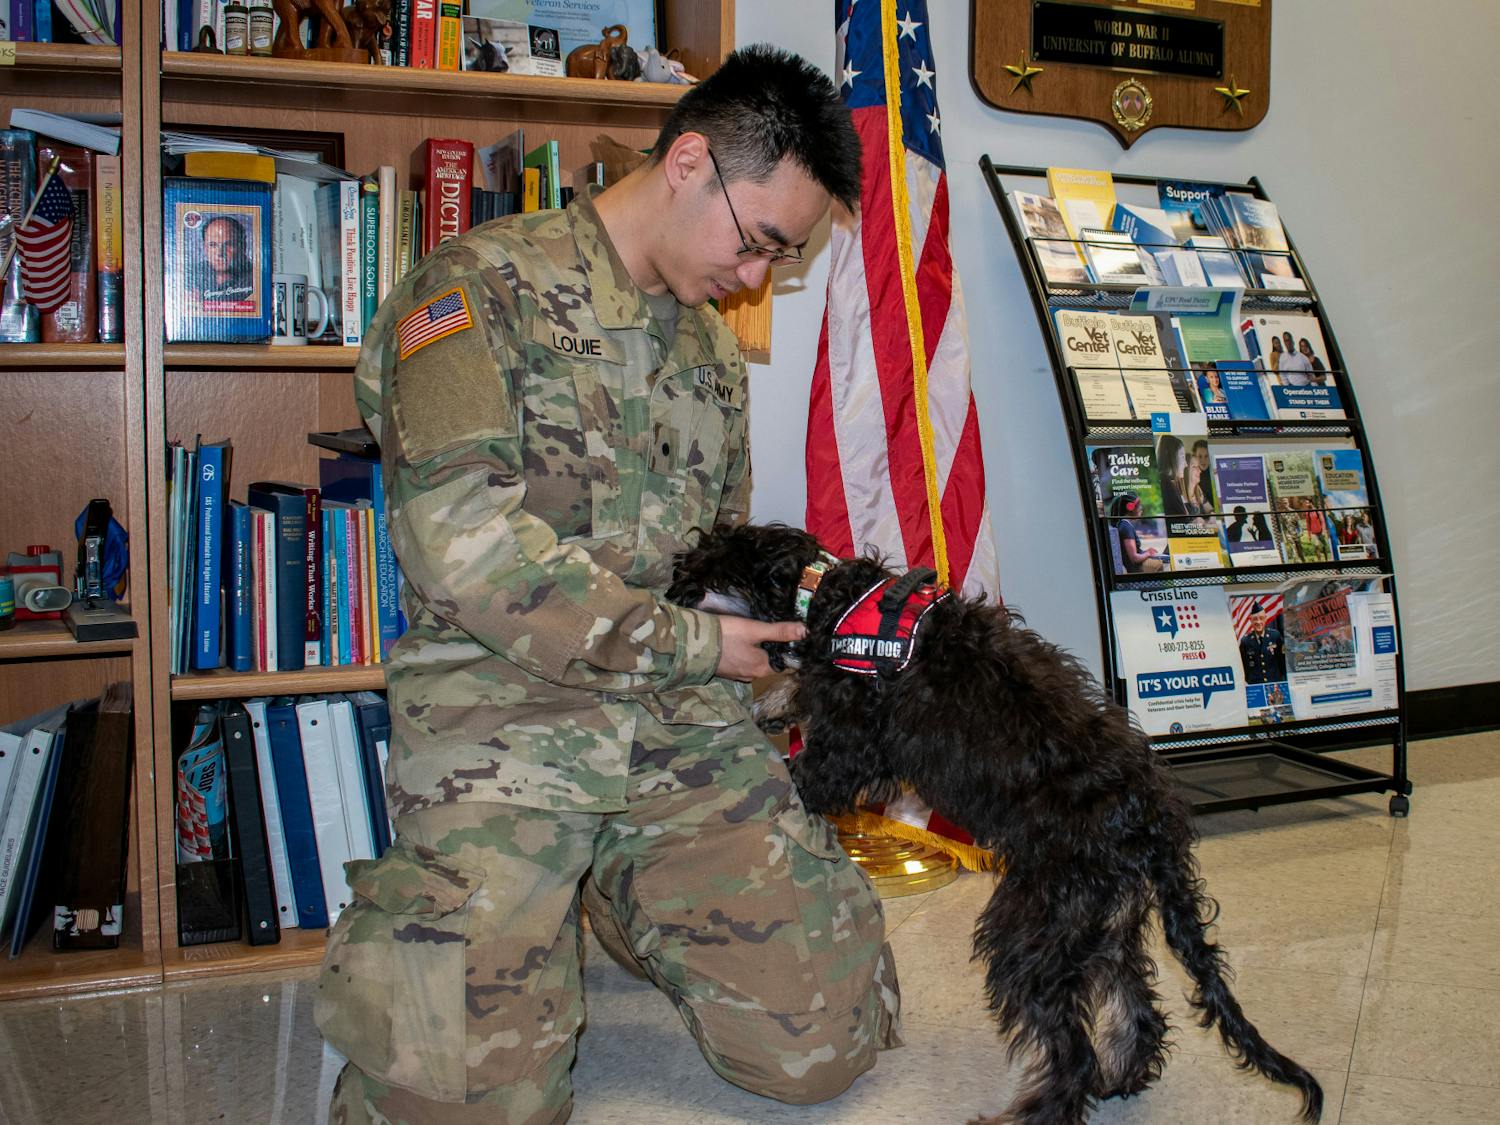 Jason Louie, a current member of the ROTC program at UB, stops in to spend some time with Finn.